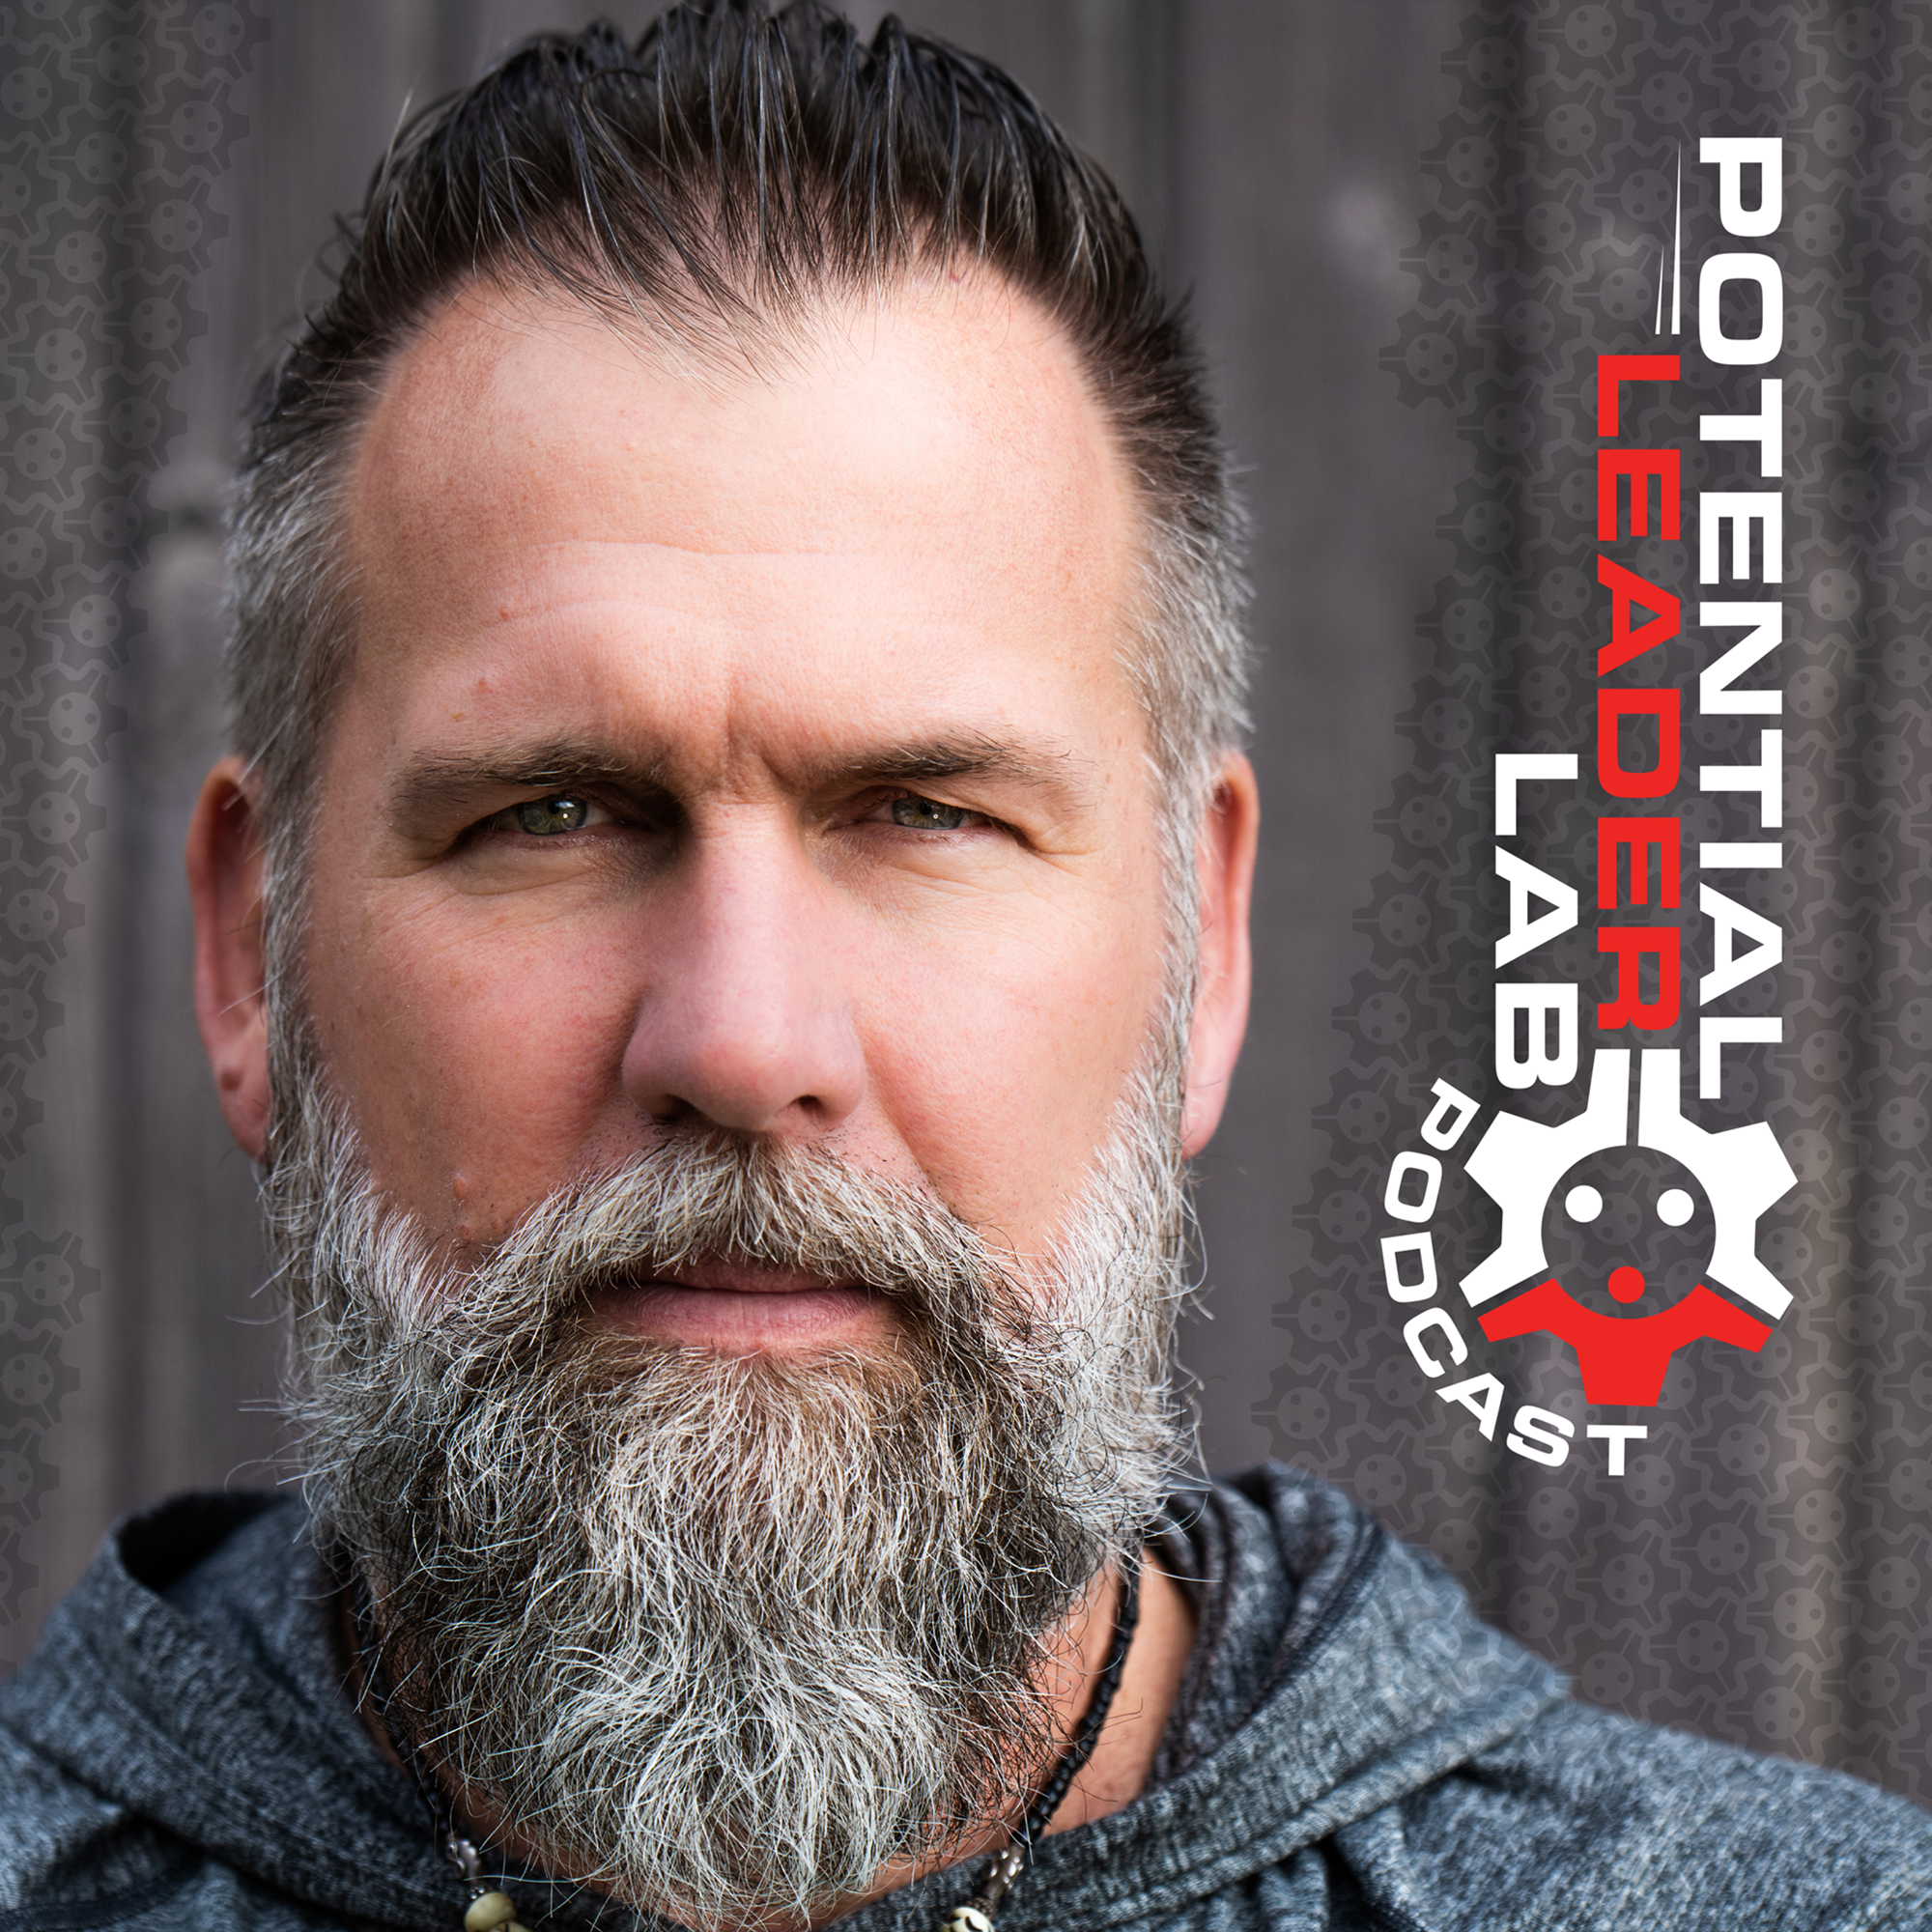 Potential Leader Lab Podcast with Perry Maughmer